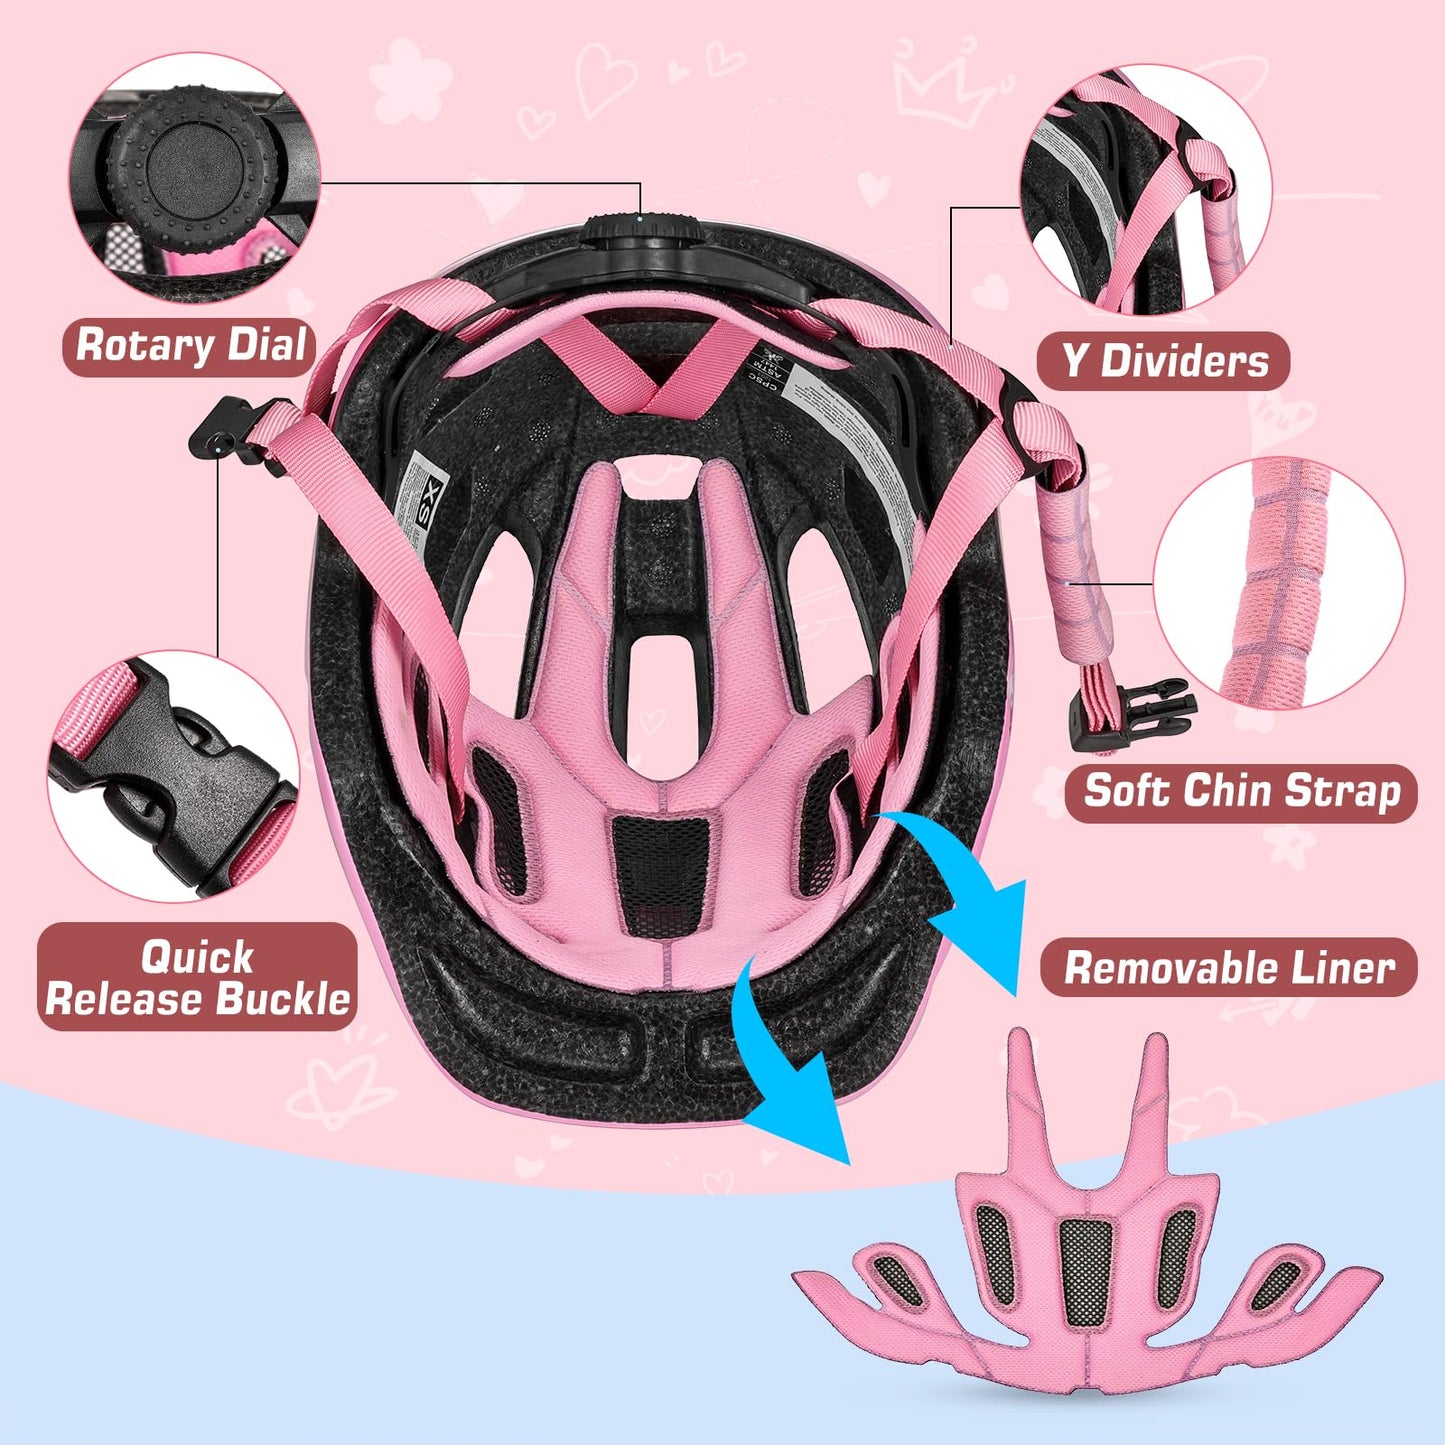 Zacro Kids Bike Helmet for Boys and Girls - From Toddler to Youth Ages 2-5/5-8/8-14 Years Old, Adjustable Multi-Sport Bicycle Skateboard Roller Skating Scooter Balance Bike Helmets for Children Safety